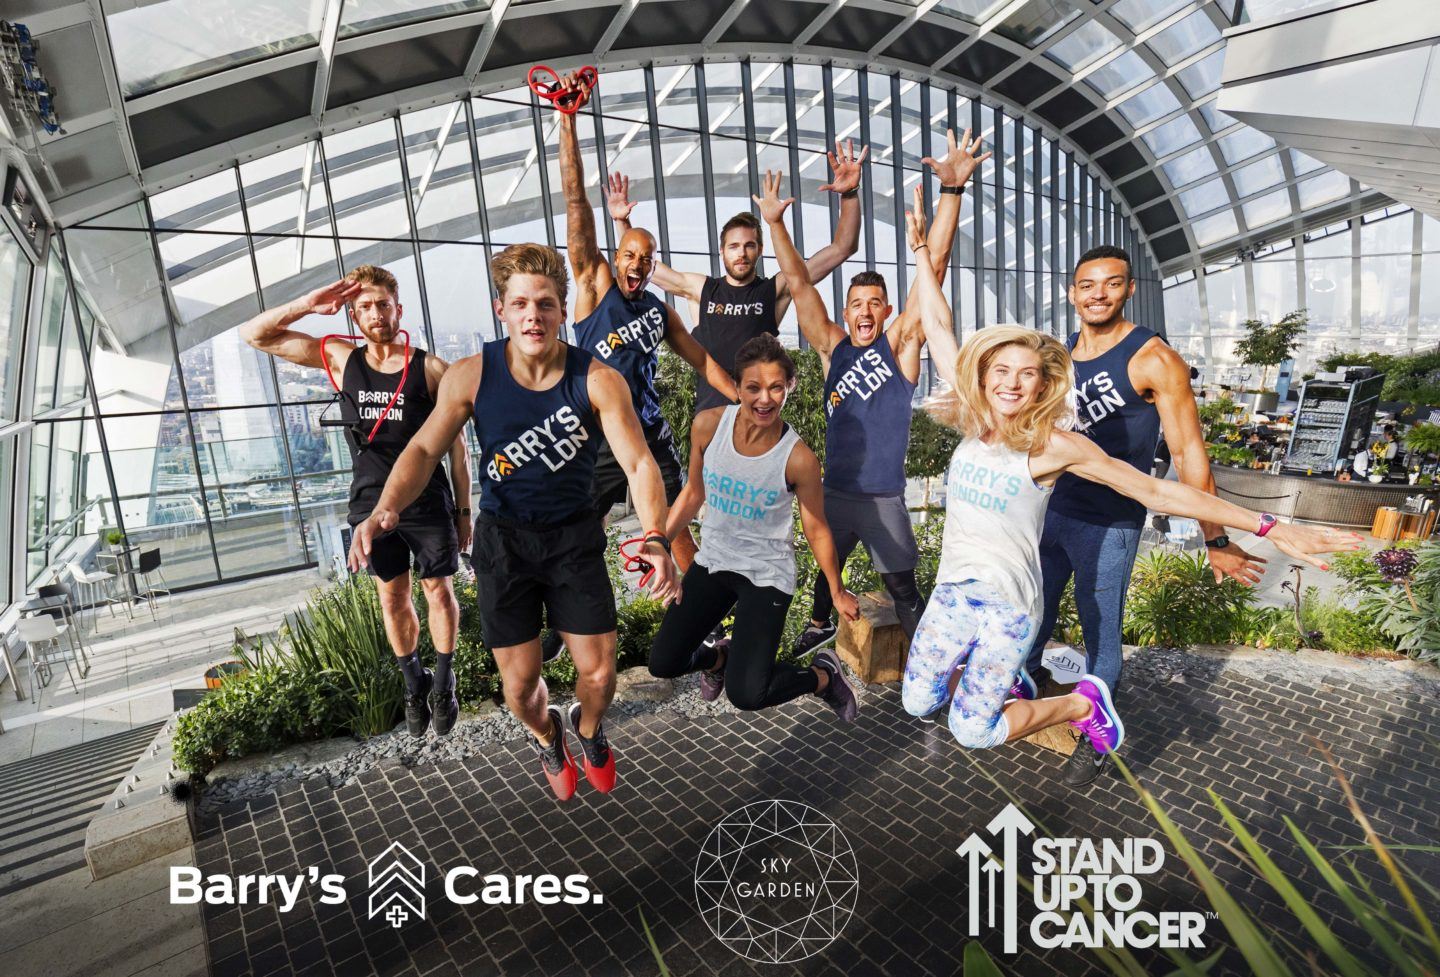 Barry's Bootcamp instructors jumping in London Sky Garden with Barry's Cares, Sky Garden, and Stand up to Cancer logos